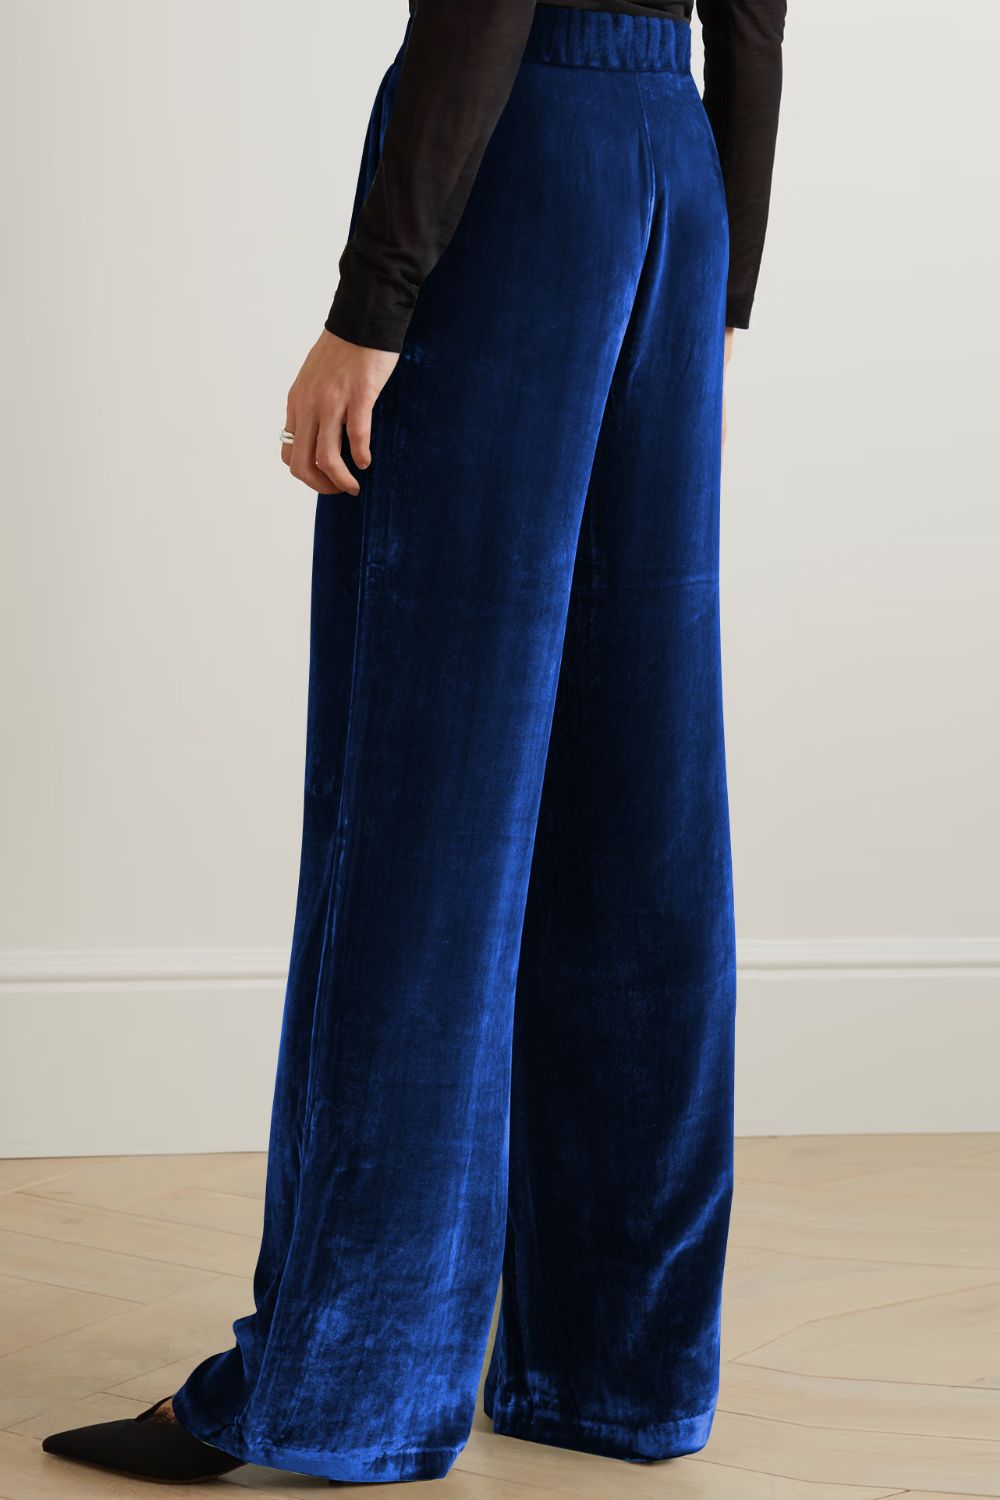 Double Take Loose Fit High Waist Long Pants with Pockets | Sugarz Chique Boutique